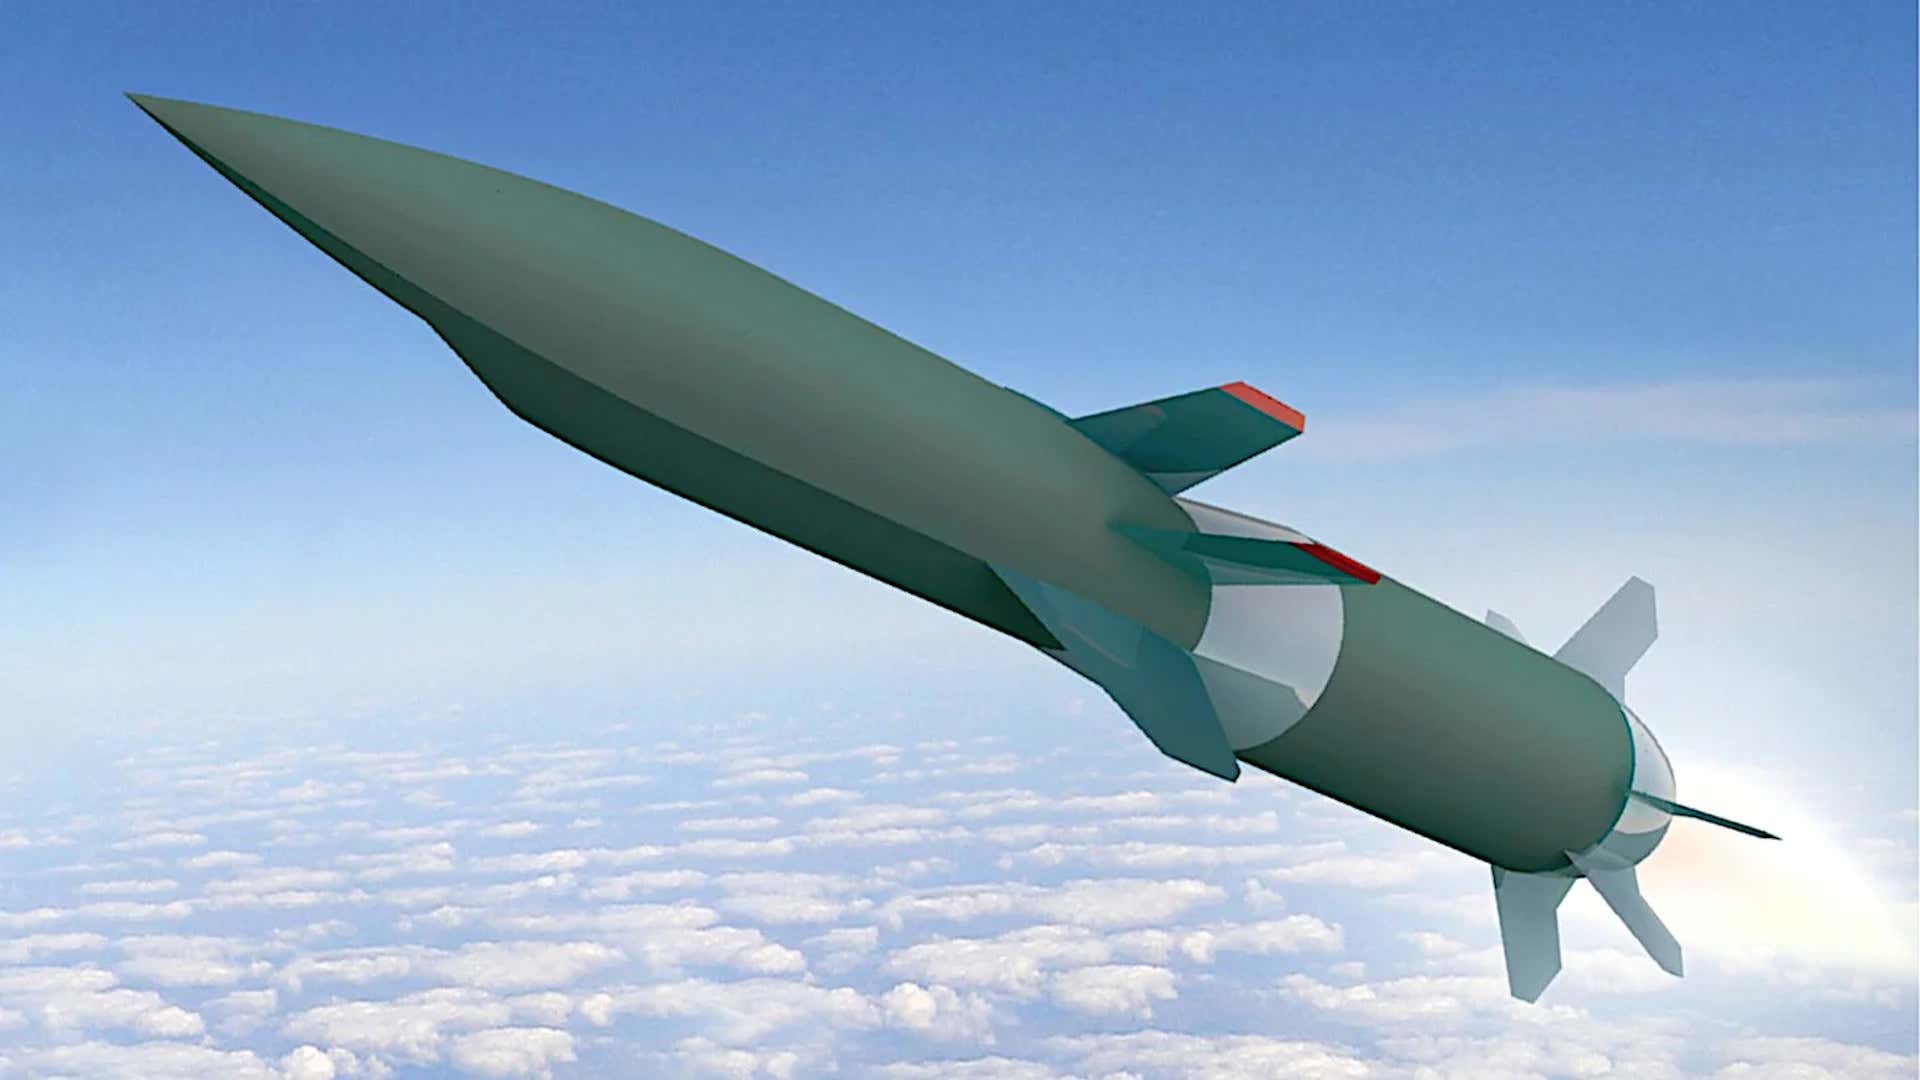 Hypersonic Missile Tests For The B-1 Bomber Are Coming Next Year According To Boeing